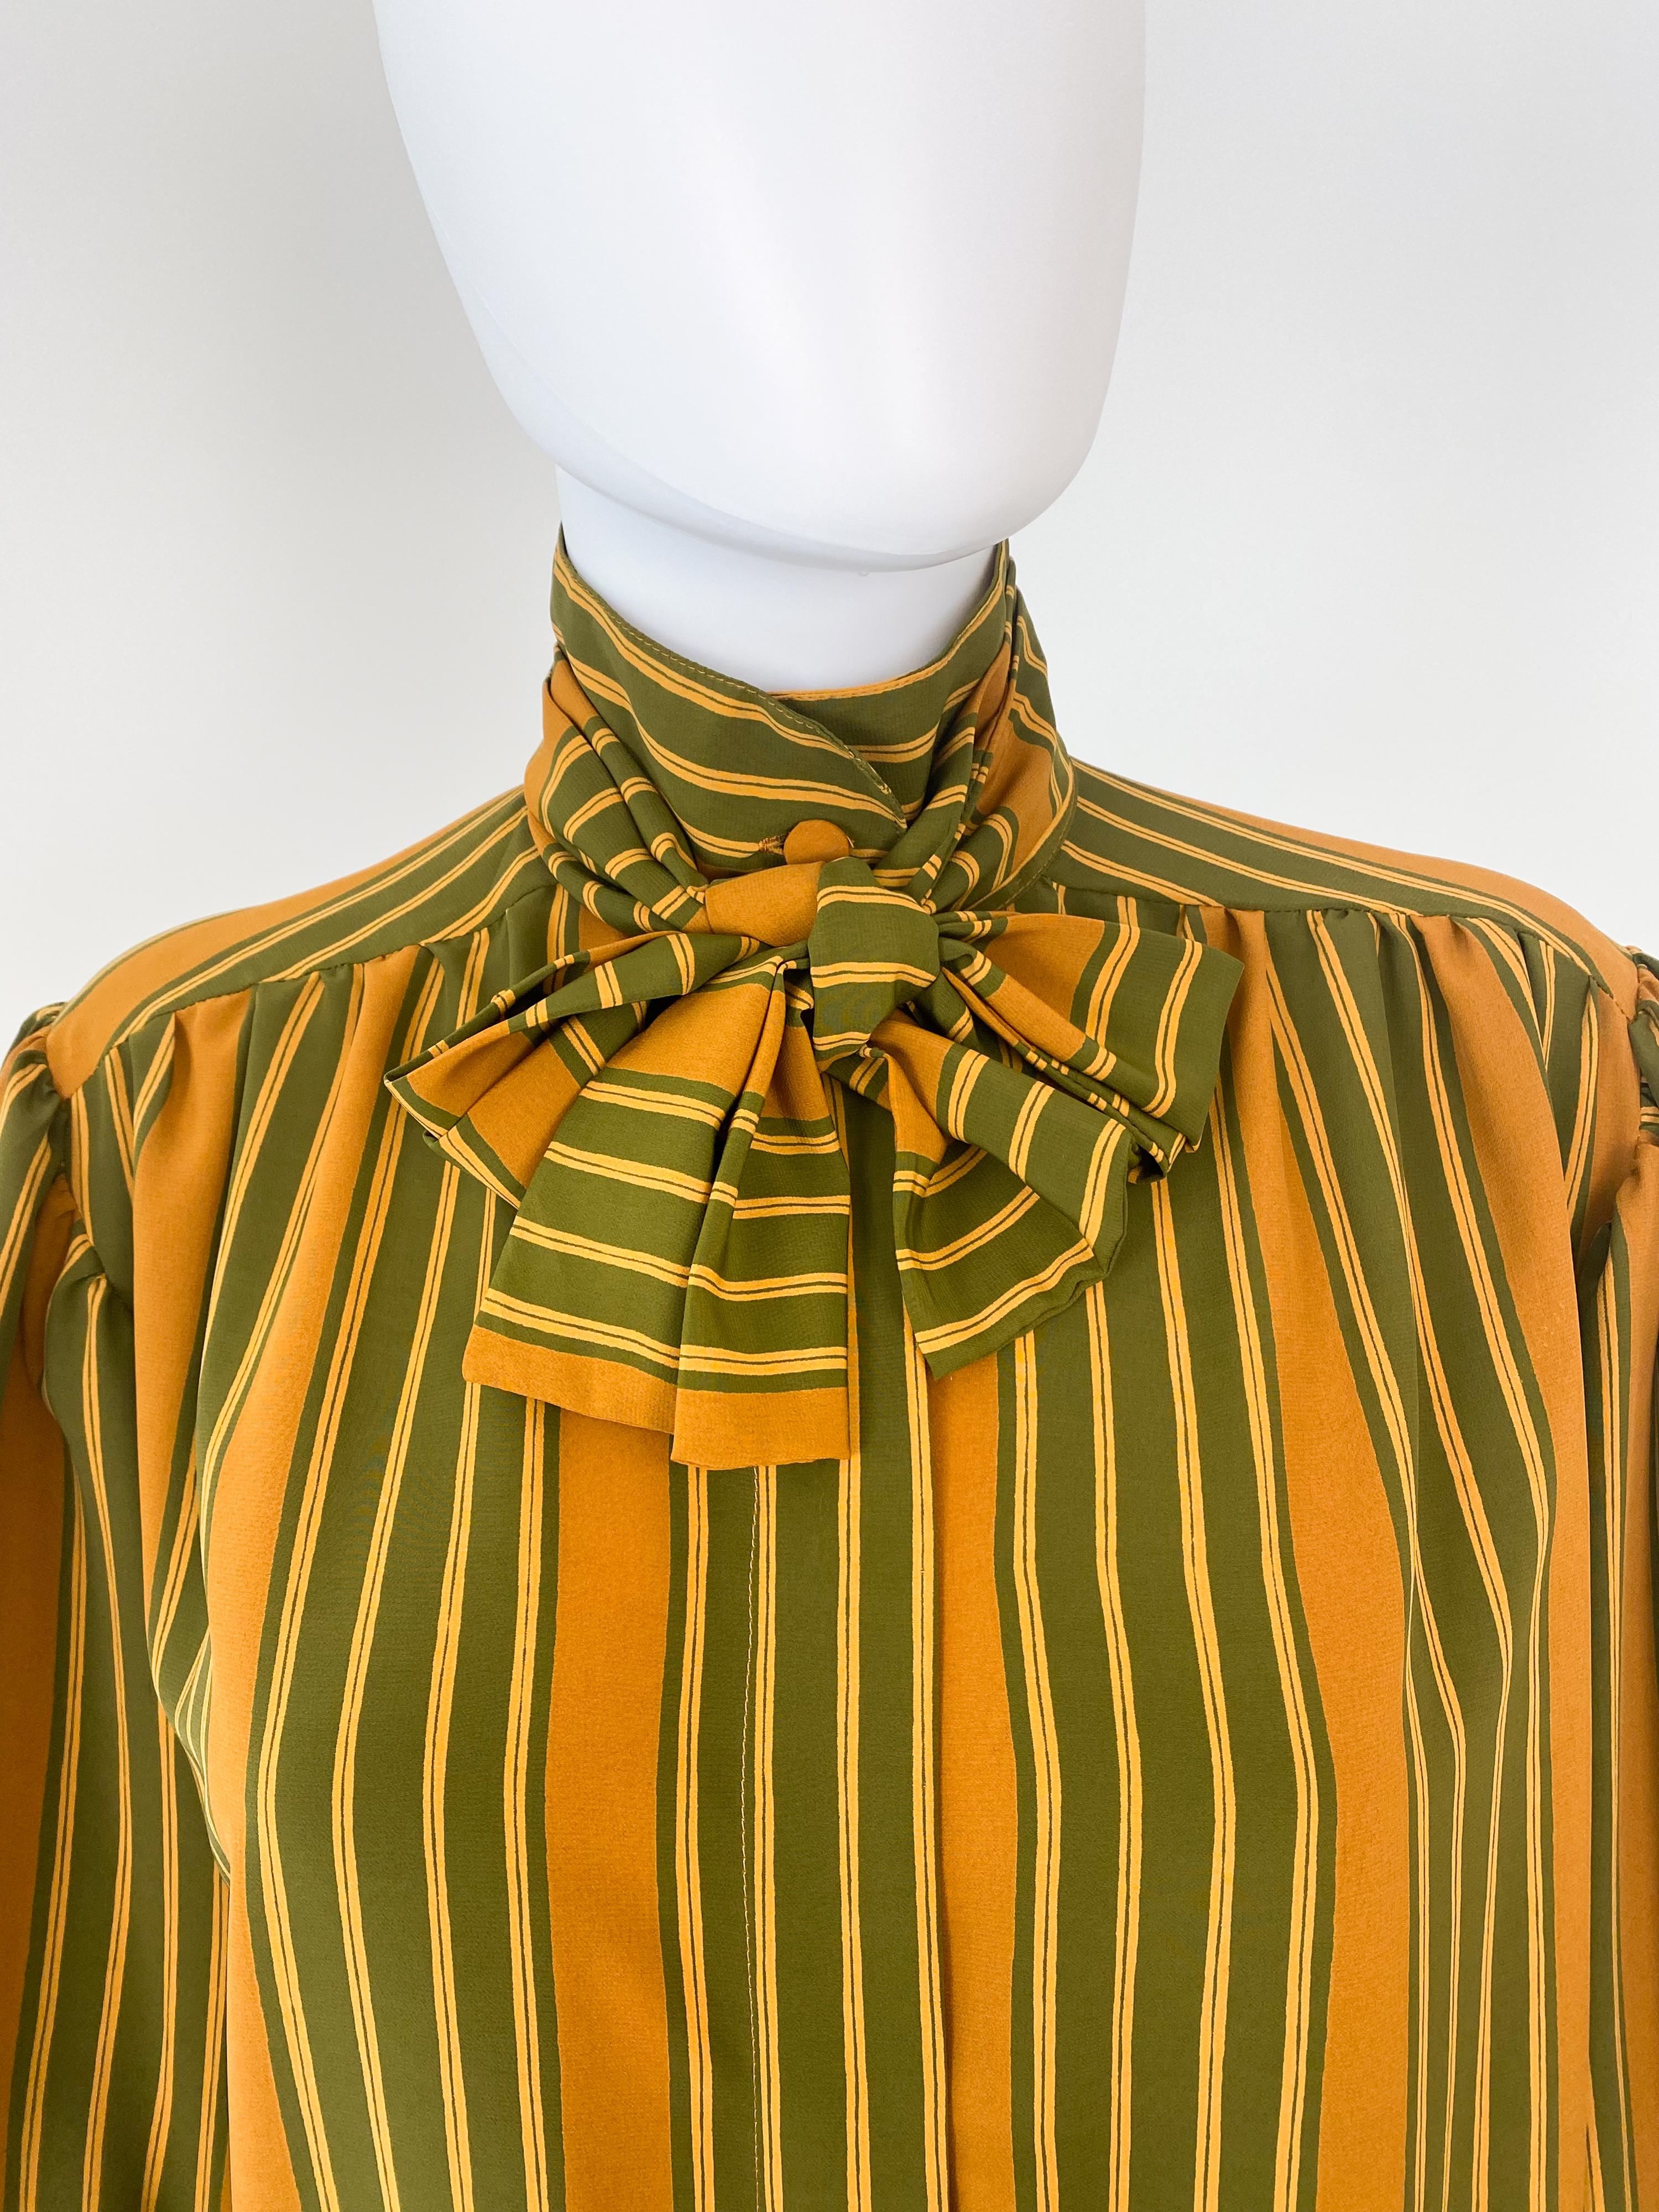 Vintage 1980s Silky Polyester Blouse Top Green and Saffran Stripes Size 10/12 For Sale 2